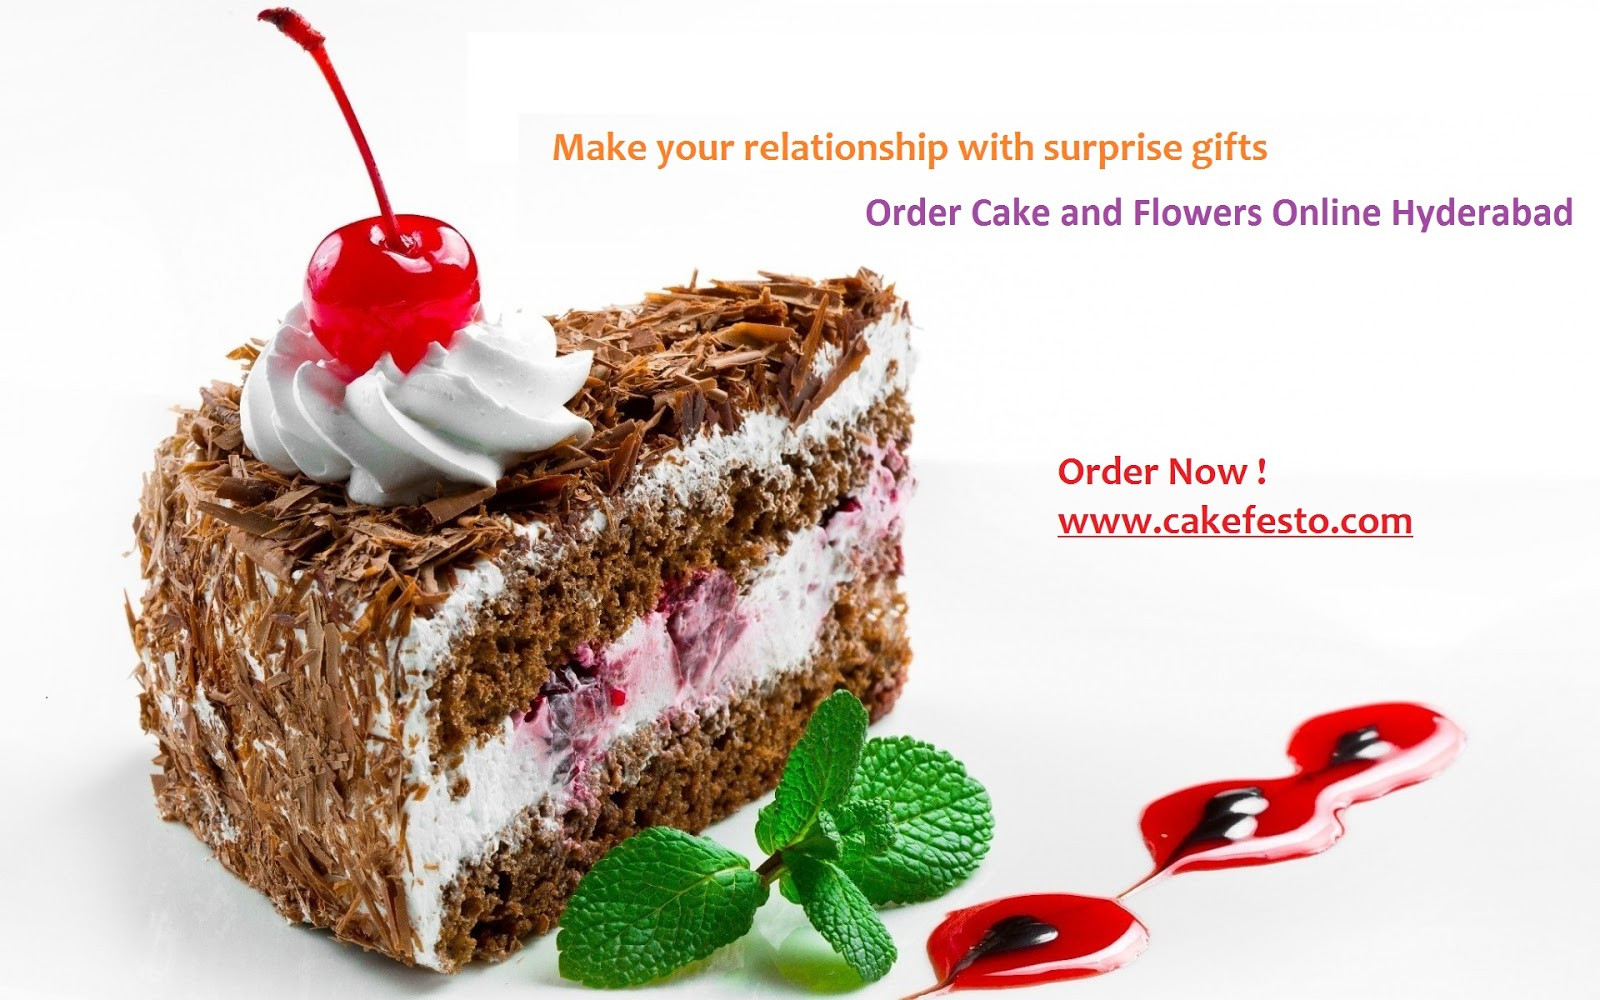 Order A Birthday Cake Online
 Order Cake and Flowers line Hyderabad – Make your